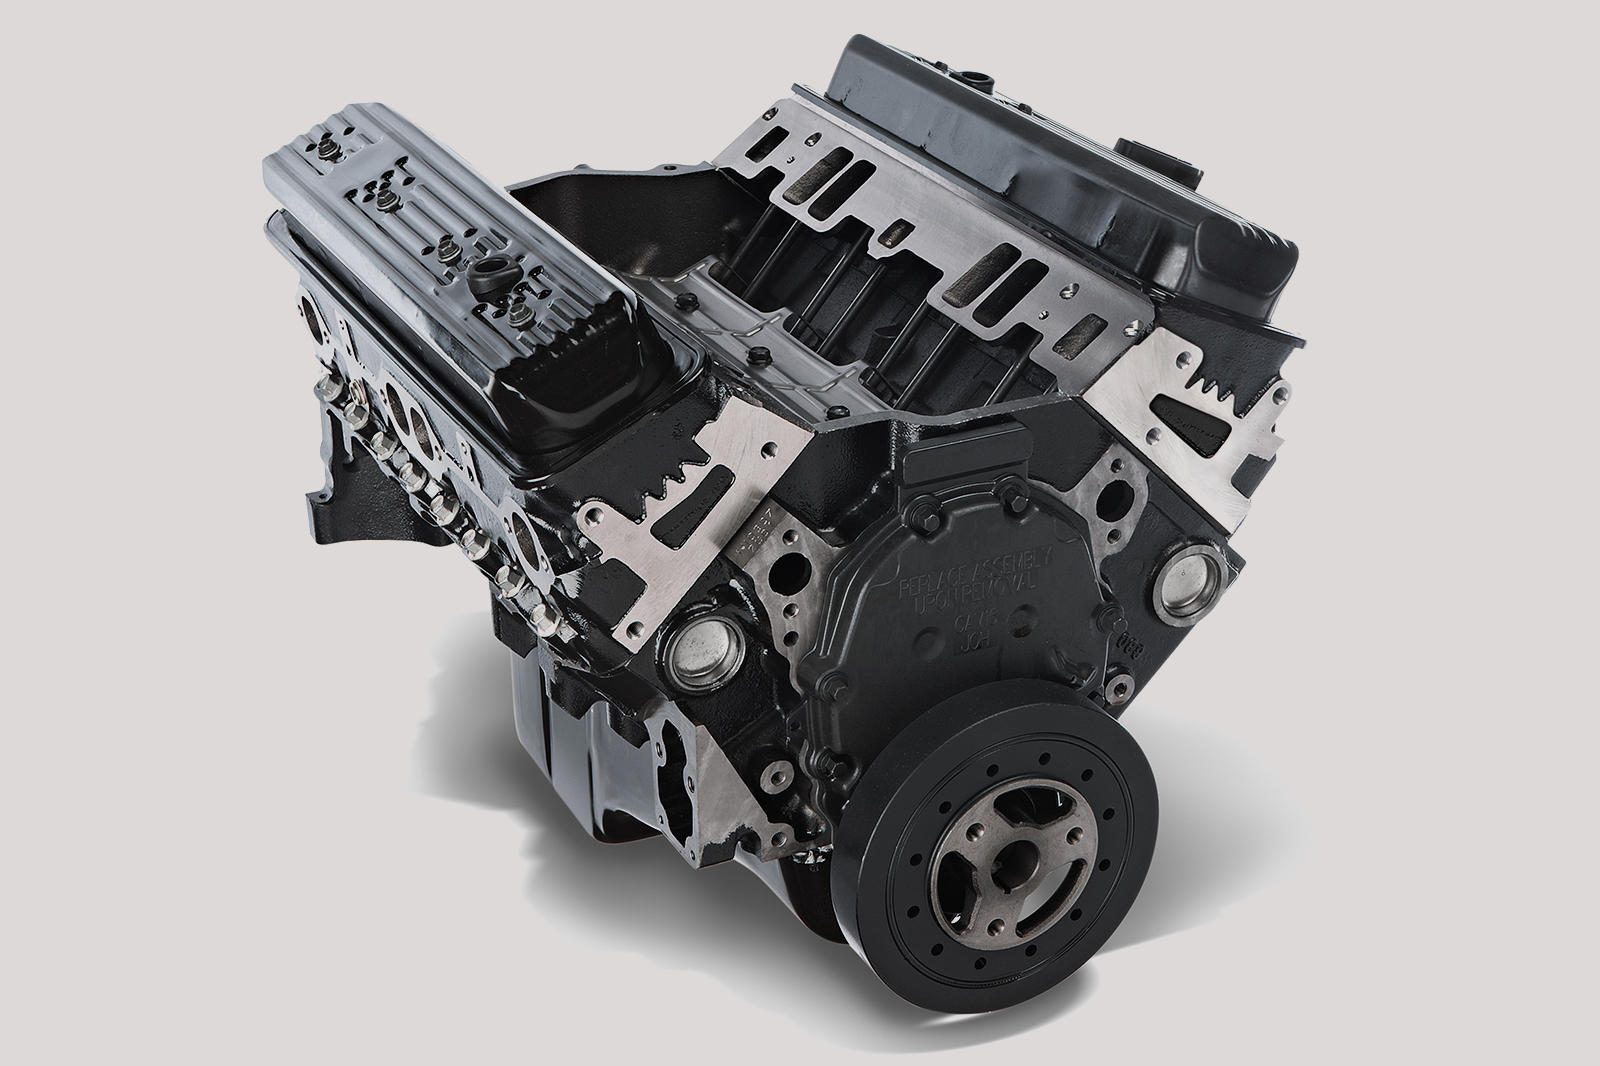 New Crate Engine Joins Gm S 350 Small Block Family Carbuzz